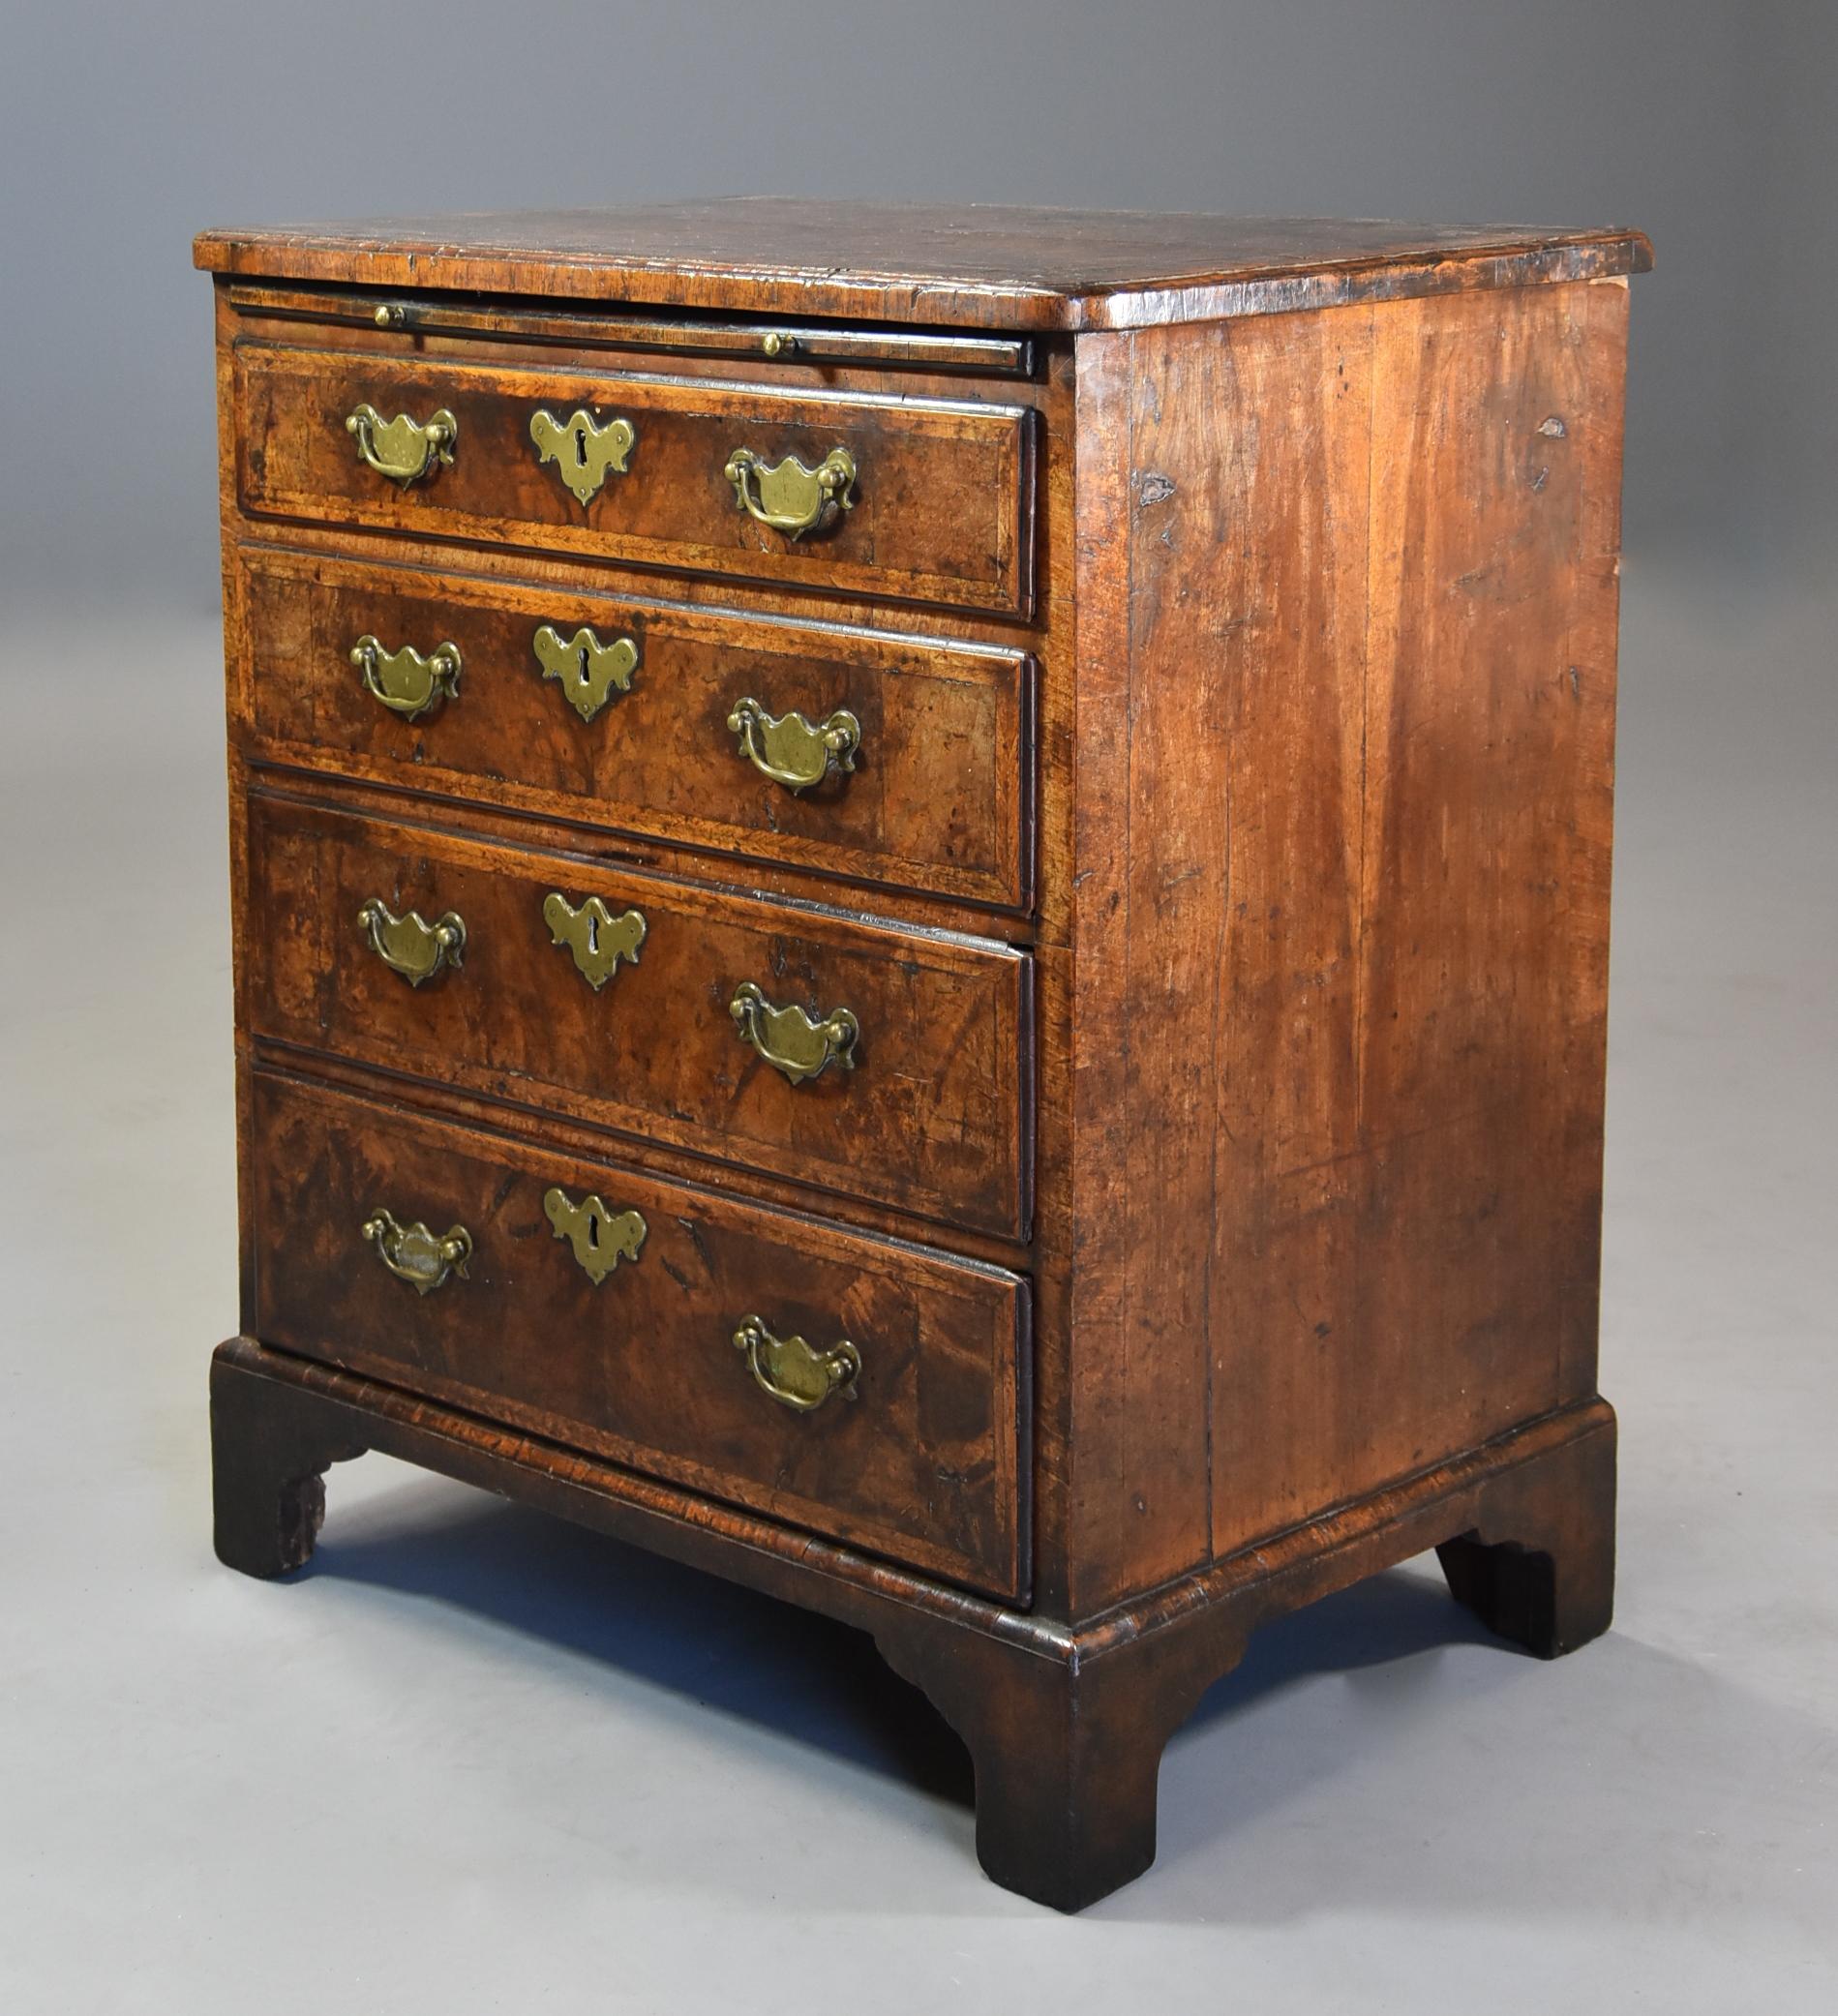 English Extremely Rare Early 18th Century Walnut Chest of Drawers in Untouched Condition For Sale